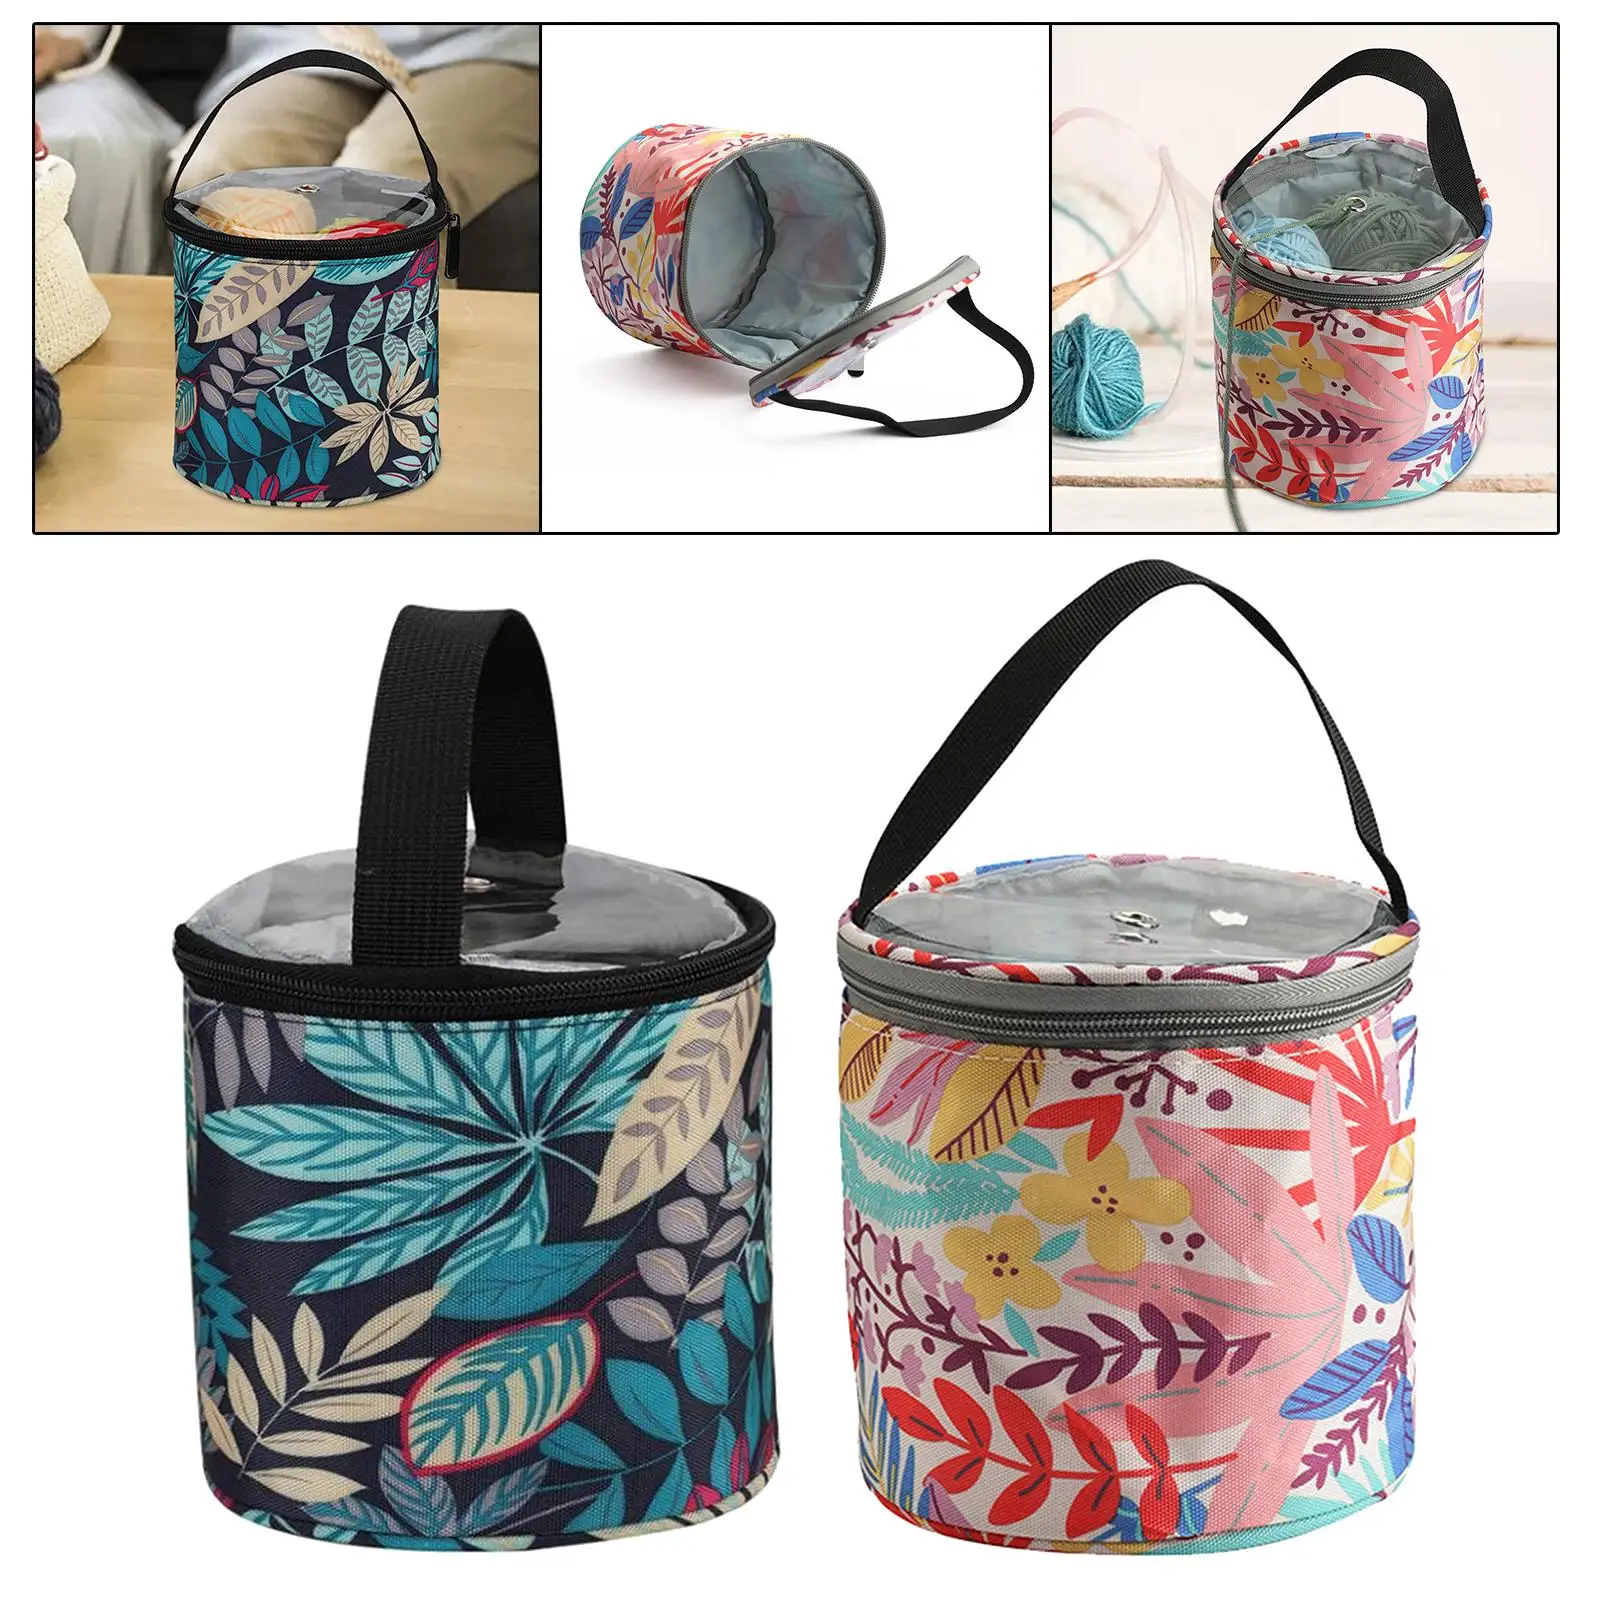 Yarn Bag for Crocheting Yarn Storage Bag with Handle Large Capacity Yarn Holder Case Tote Container for Knitting Lovers Gift